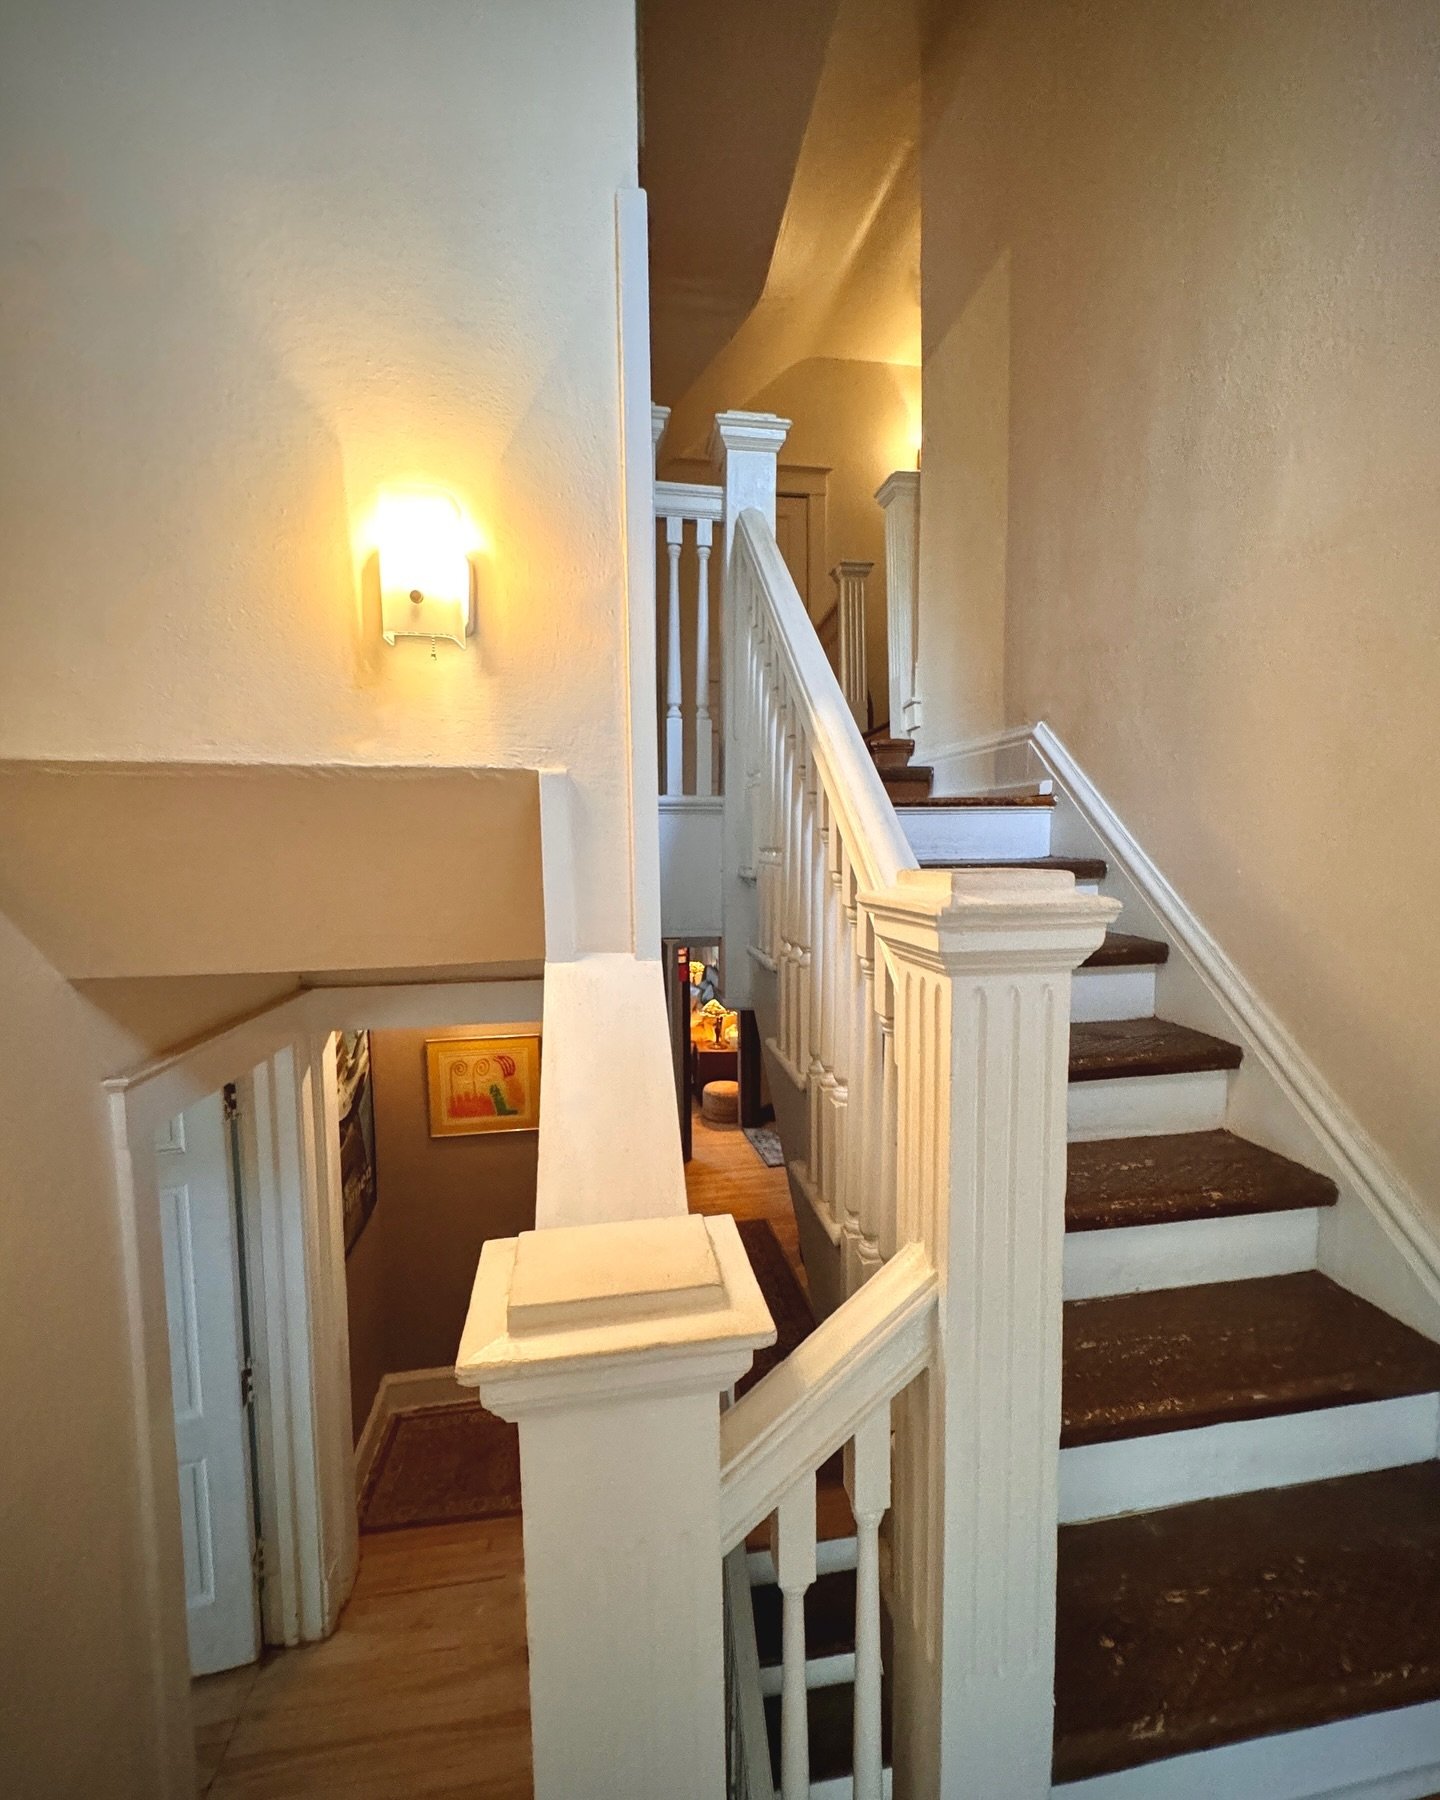 The rear &ldquo;service&rdquo; staircase is the only one in the house that runs from the basement all the way up to the third floor maids rooms and ballroom. Compared to most typical service stairs of the day, it is wider and a lot less steep as it s